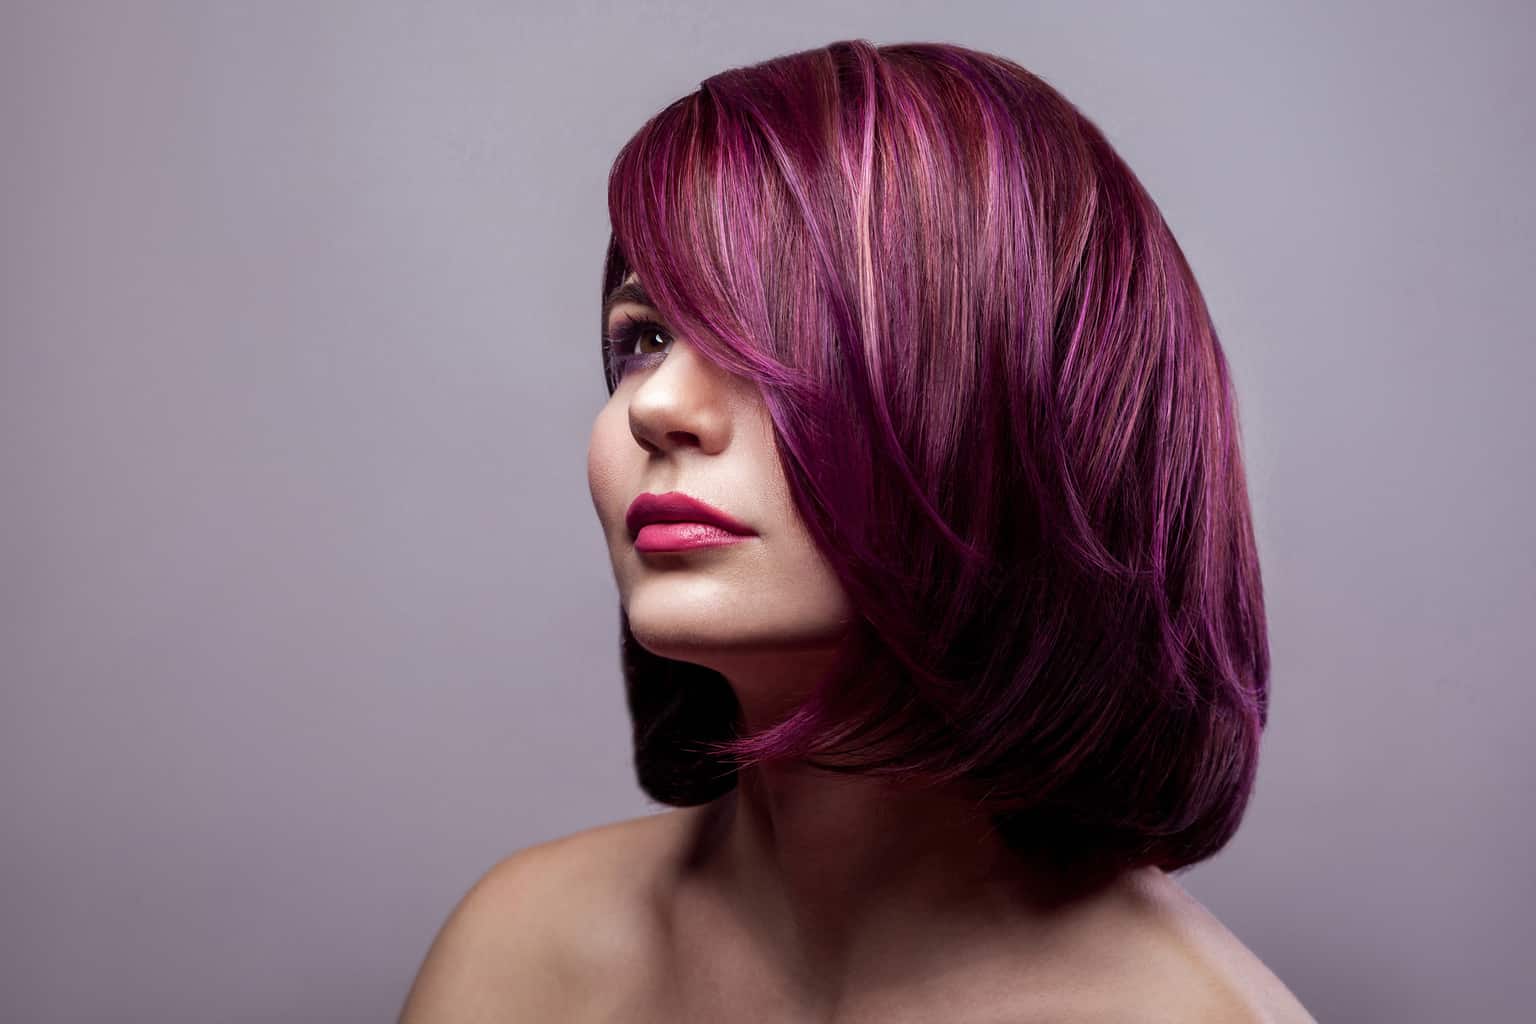 Portrait of beautiful fashion model woman with short purple colored hairstyle and makeup and looking away. indoor studio shot, isolated on gray background.